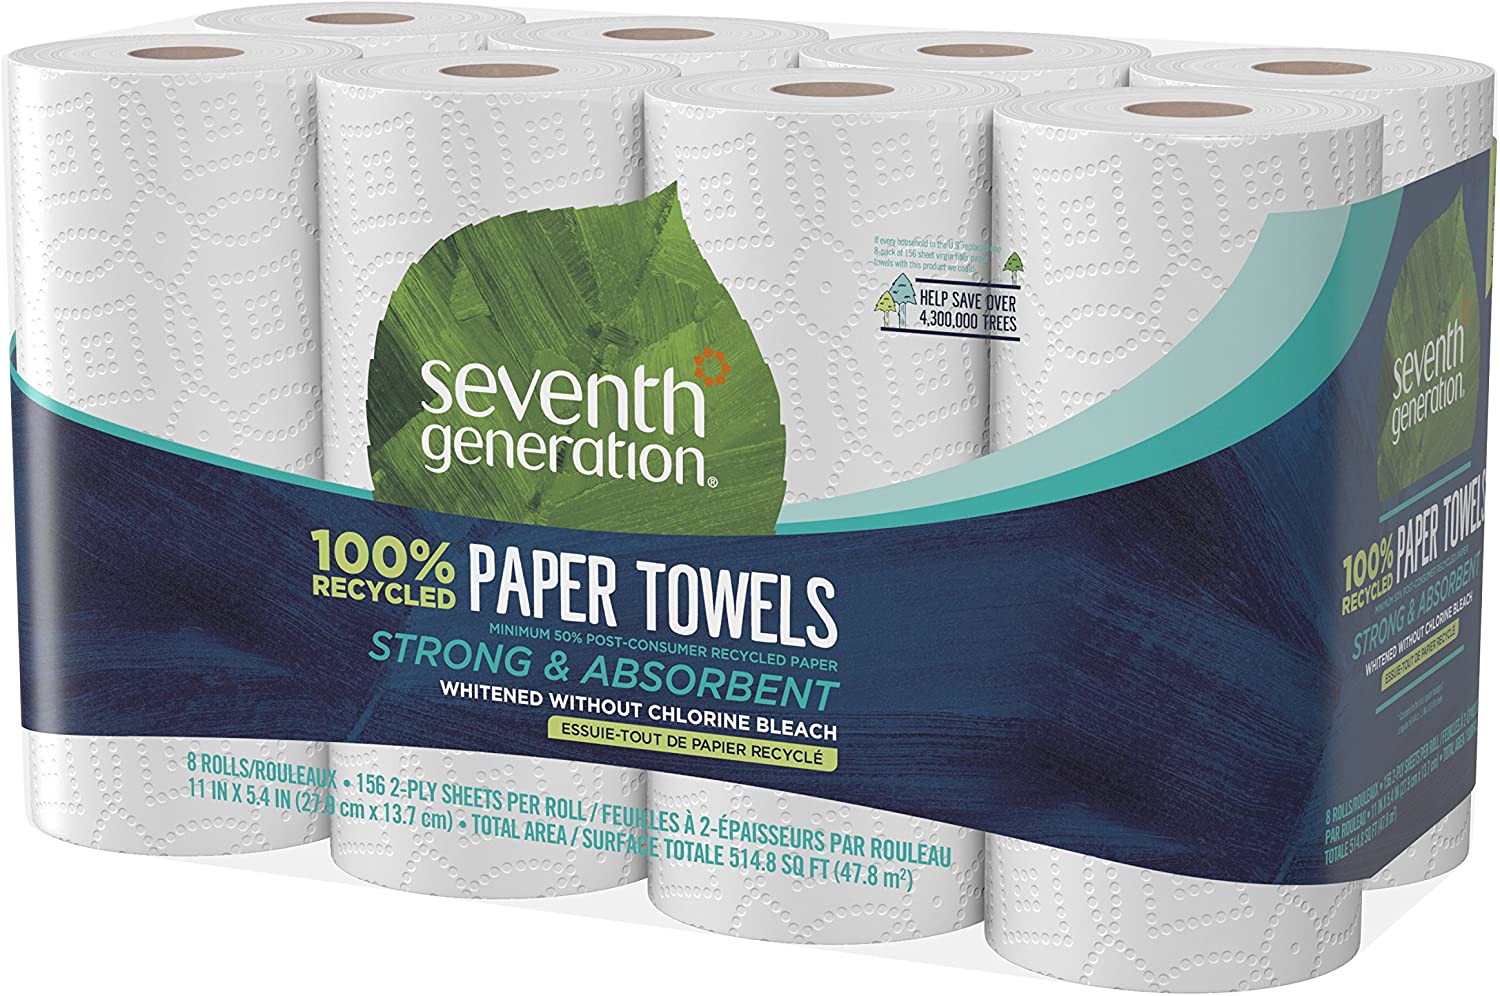 Paper Towels, 100% Recycled Paper, 2-ply, 8 Count, Pack of 4